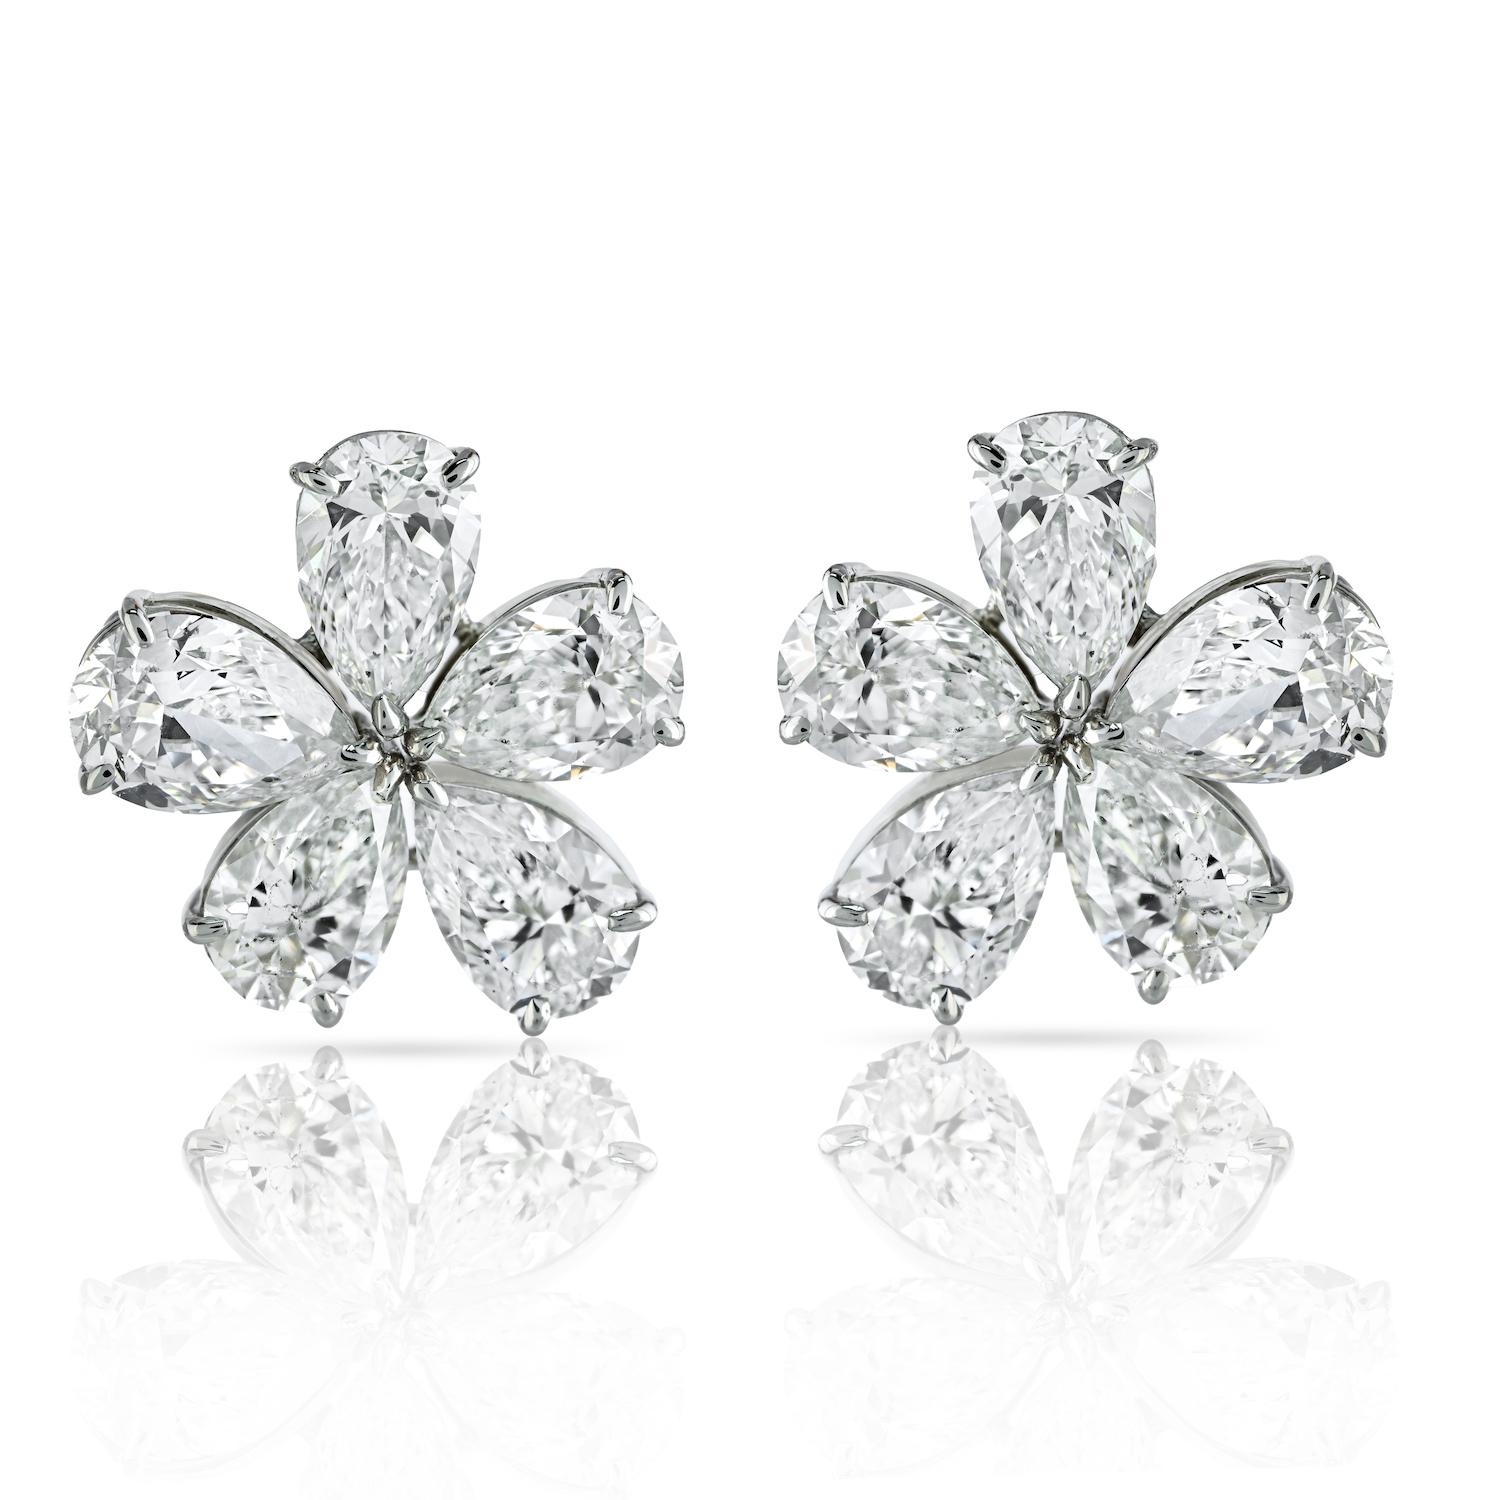 Adorn yourself with the epitome of elegance and luxury – the 16.01-carat total weight GIA Certified D-E Color Pear Cut Diamond Flower Stud Earrings. Crafted with meticulous artistry, these exquisite earrings feature ten pear-shaped diamonds, each